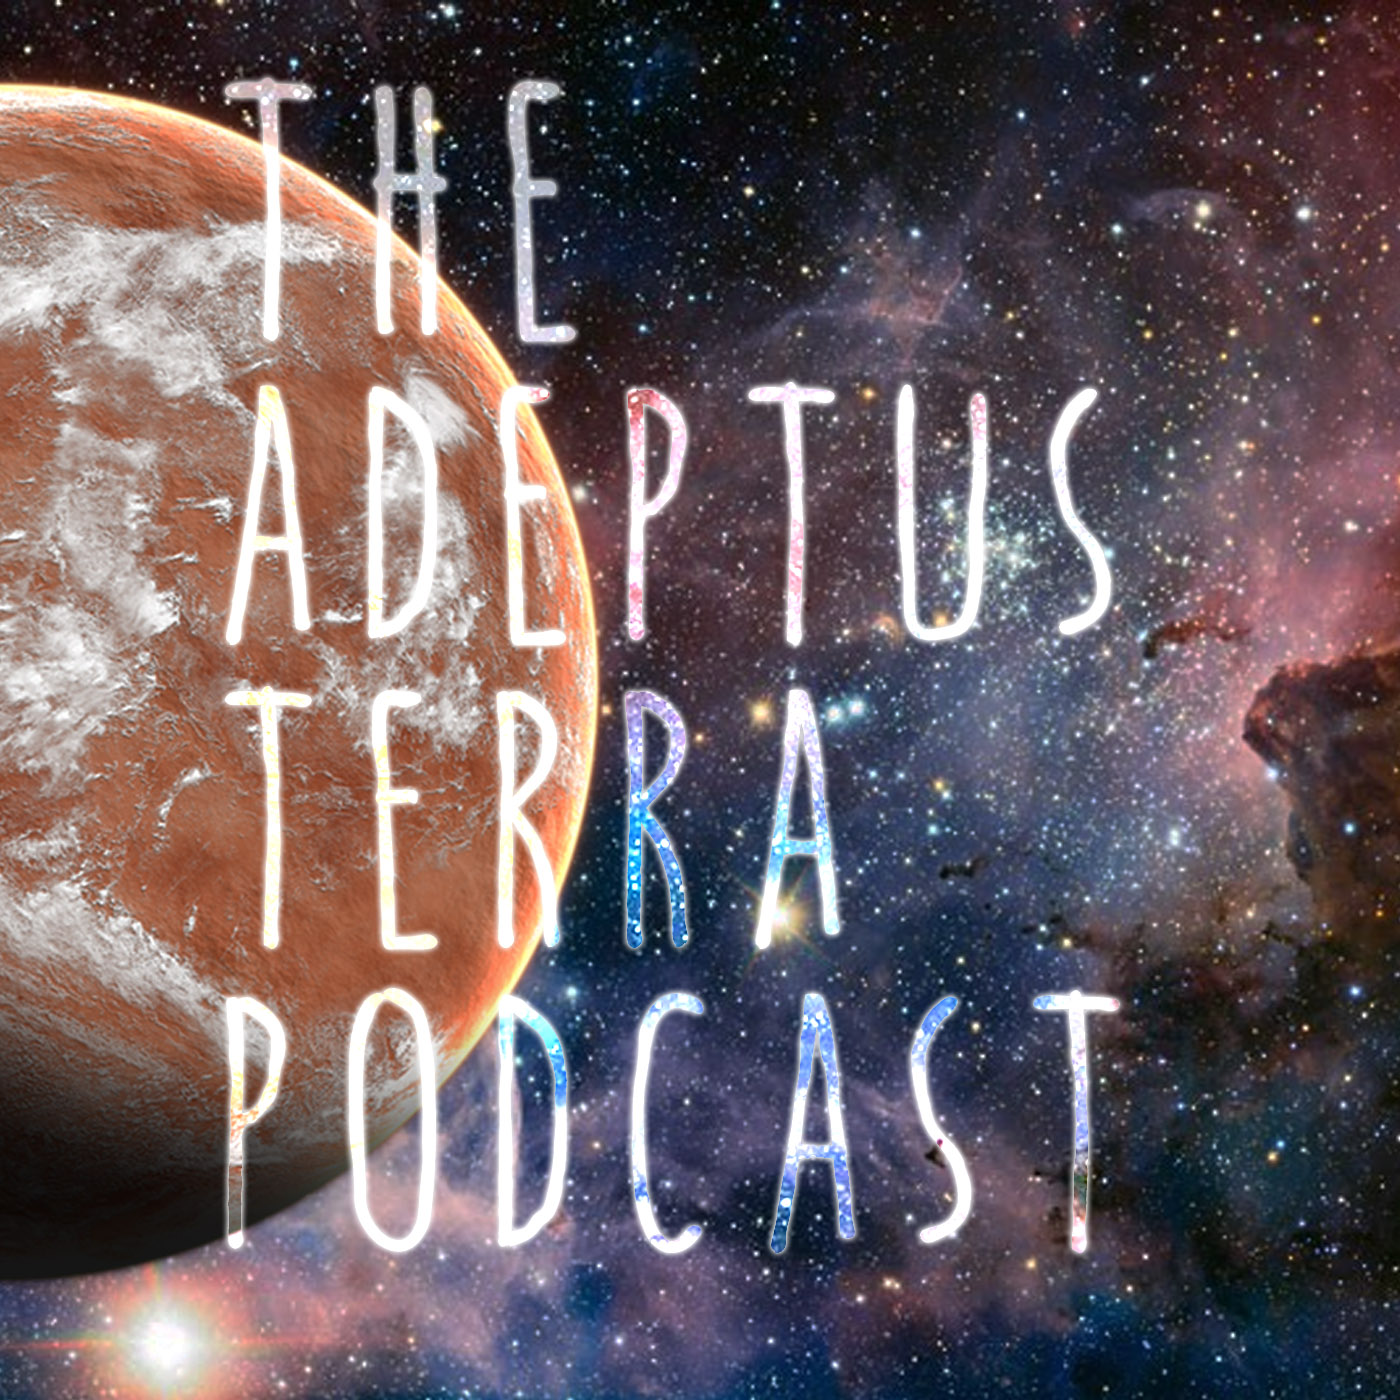 The Adeptus Terra Podcast Episode 41 'Big Fish, Little Fish and the Deathwatch